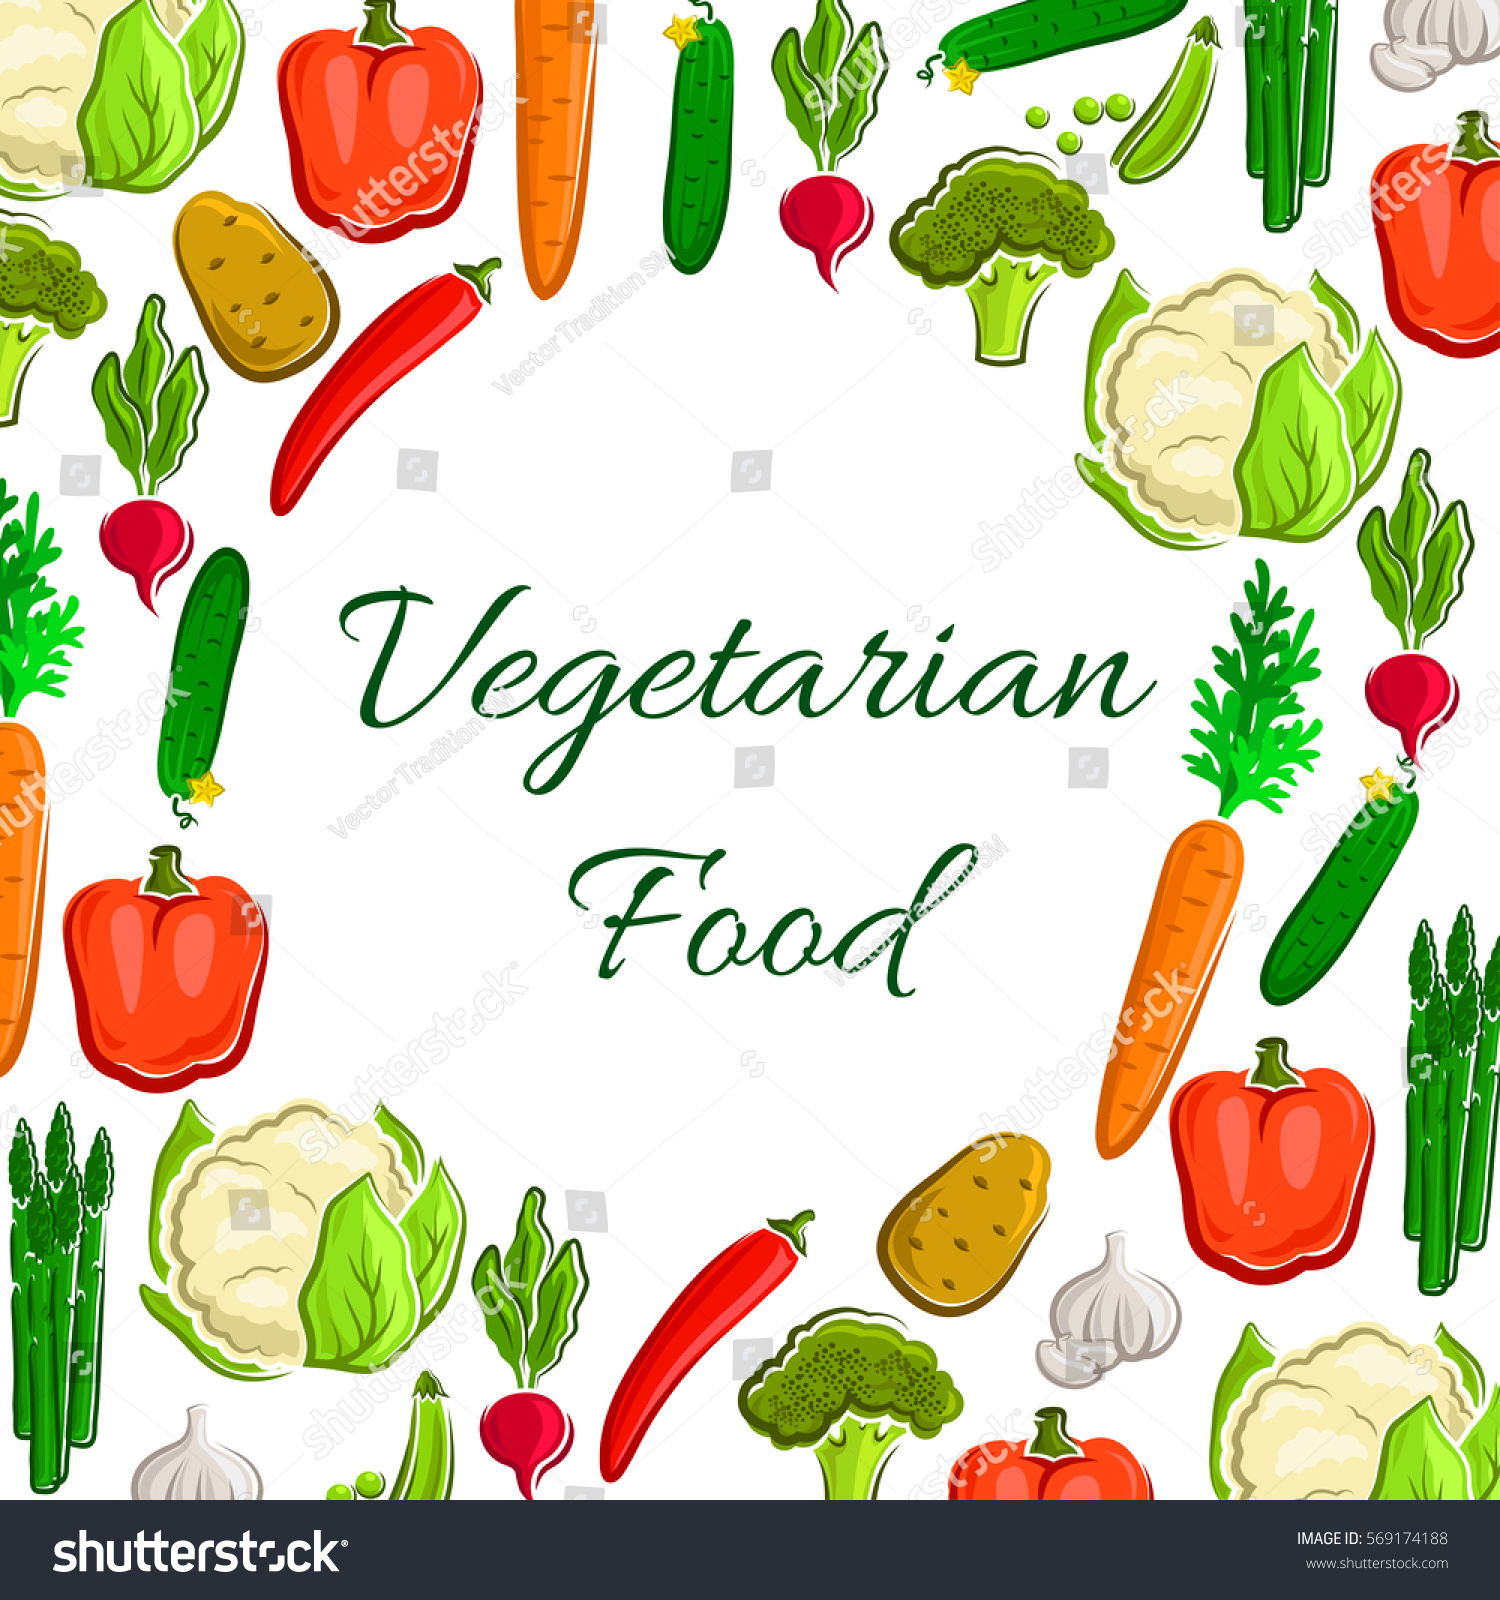 Veggies, greens and vegetables poster. Vegetarian vector cauliflower and broccoli, tomato and potato, asparagus, onion and leek, carrot and cucumber, bell and chili pepper, radish, garlic and pea #569174188